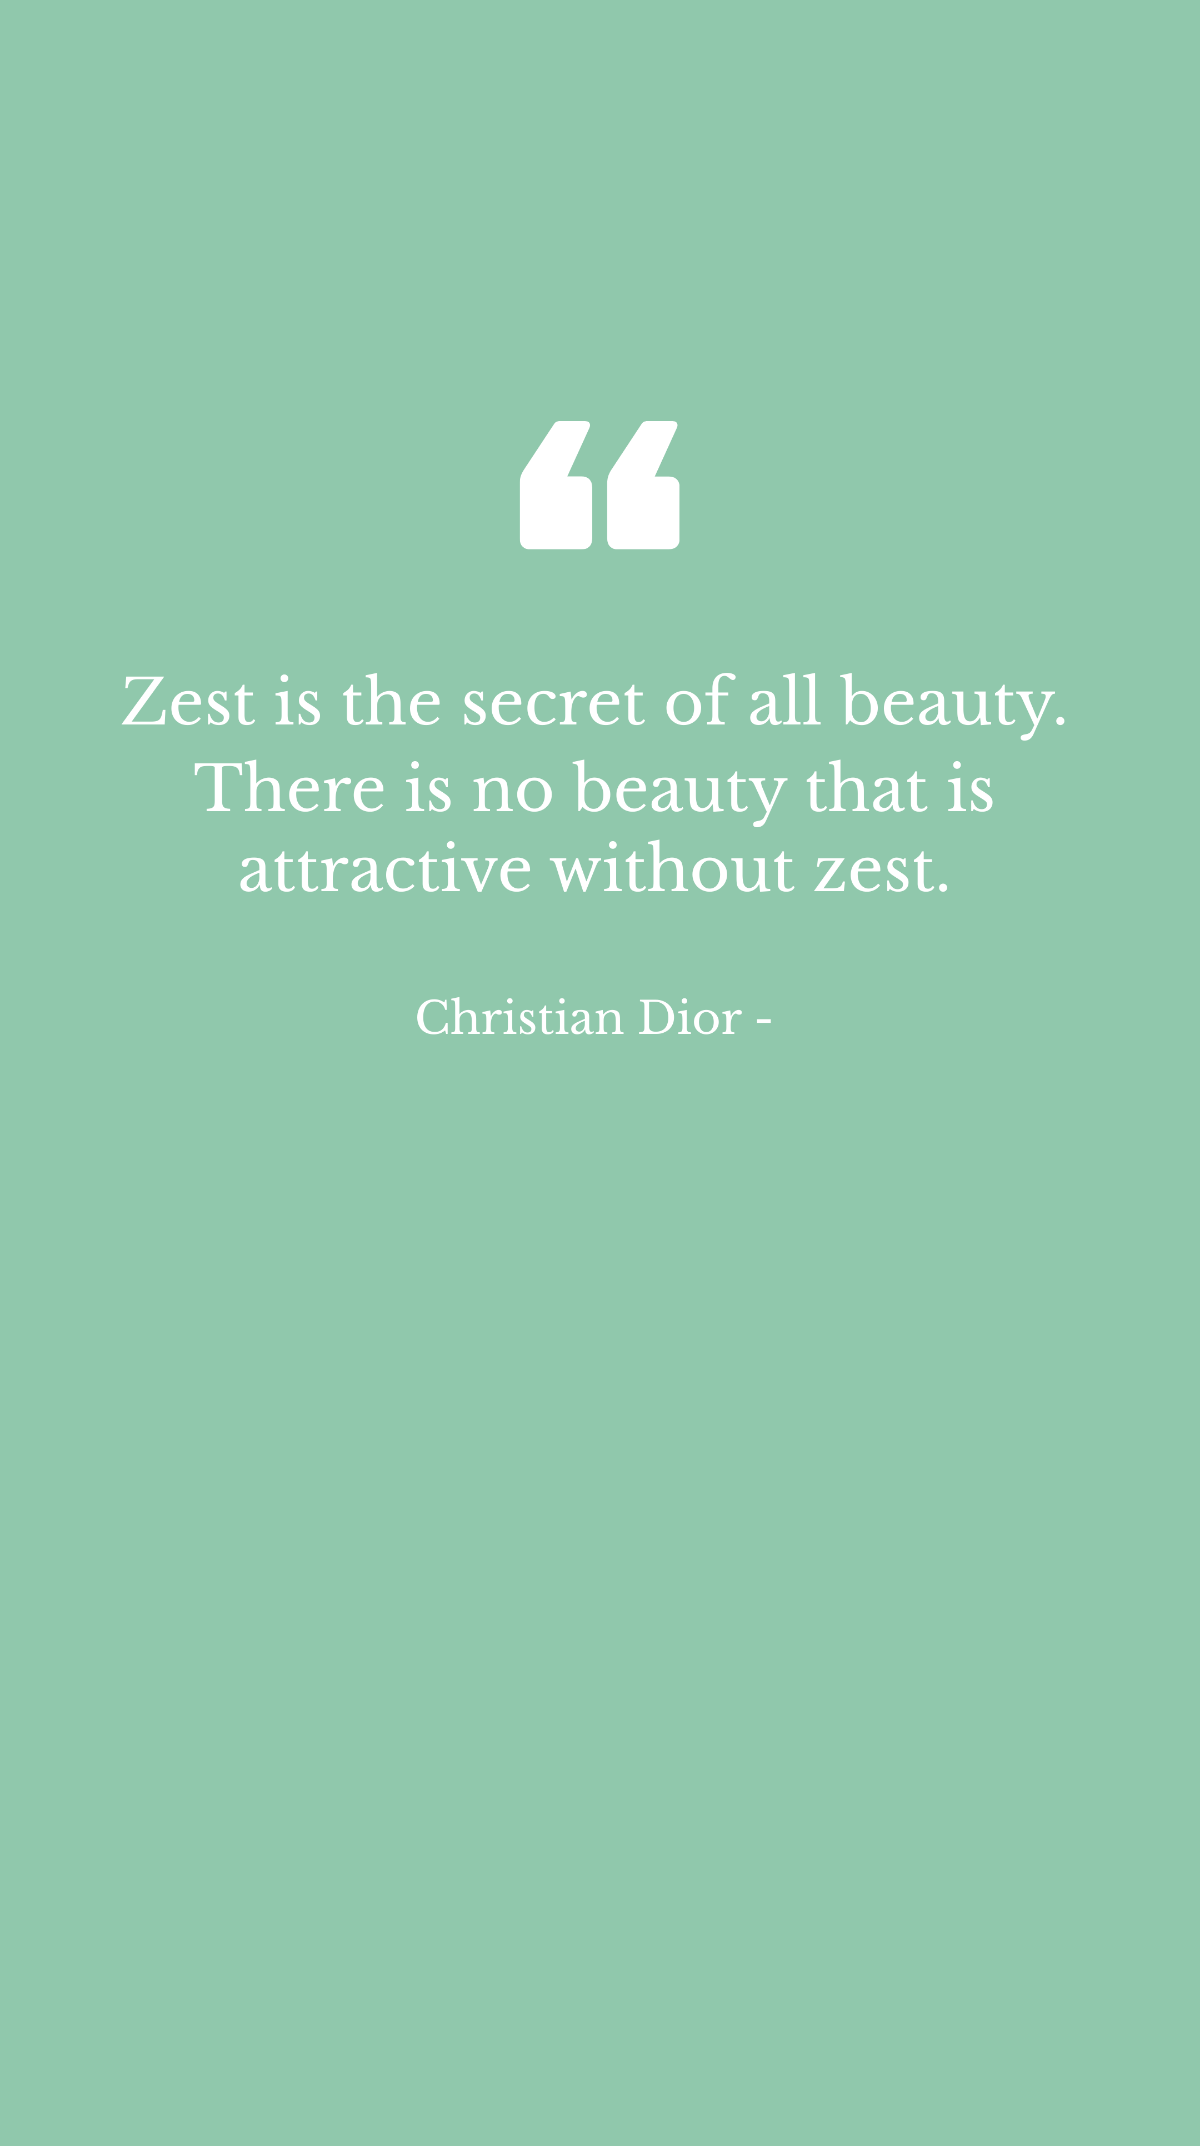 Christian Dior - Zest is the secret of all beauty. There is no beauty that is attractive without zest. Template